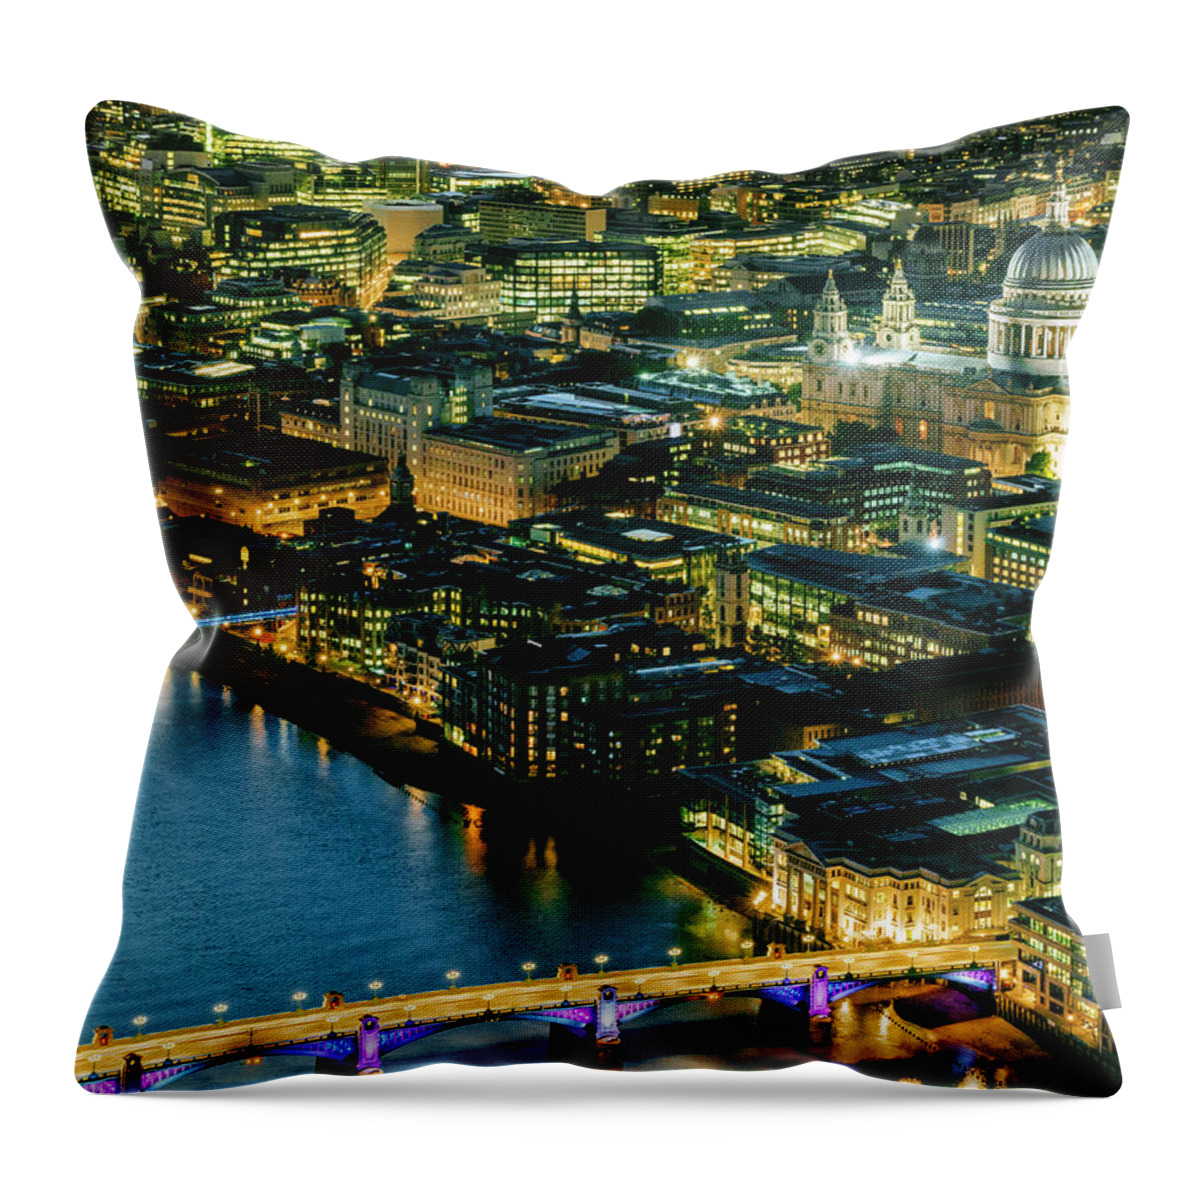 English Culture Throw Pillow featuring the photograph St Pauls Cathedral Illuminated At Dusk by Doug Armand